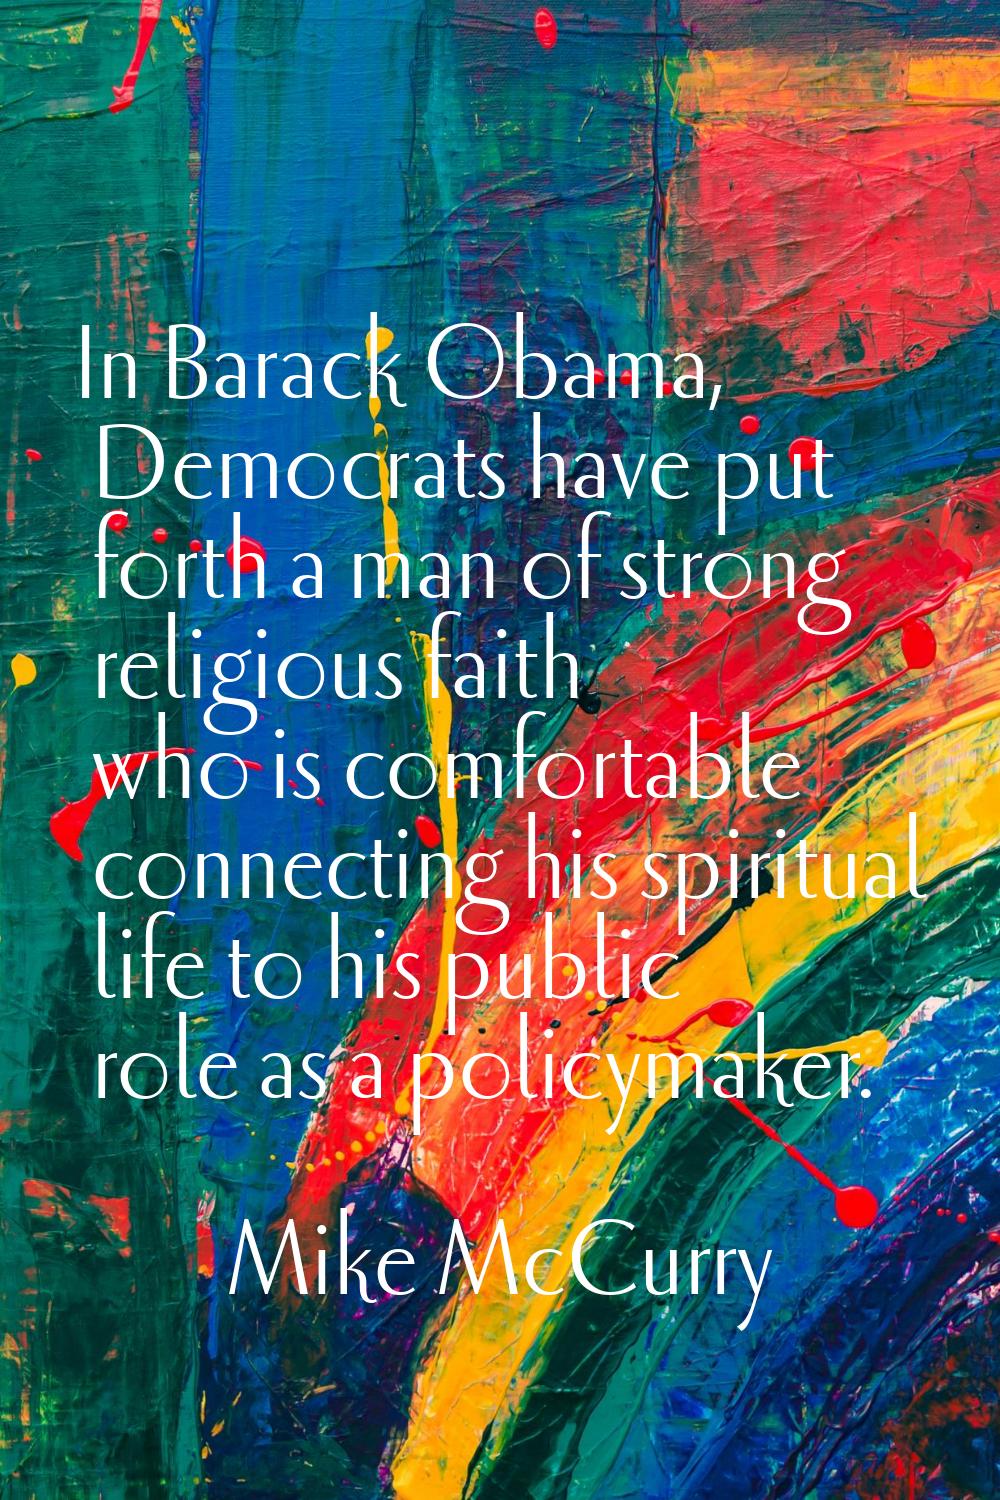 In Barack Obama, Democrats have put forth a man of strong religious faith who is comfortable connec